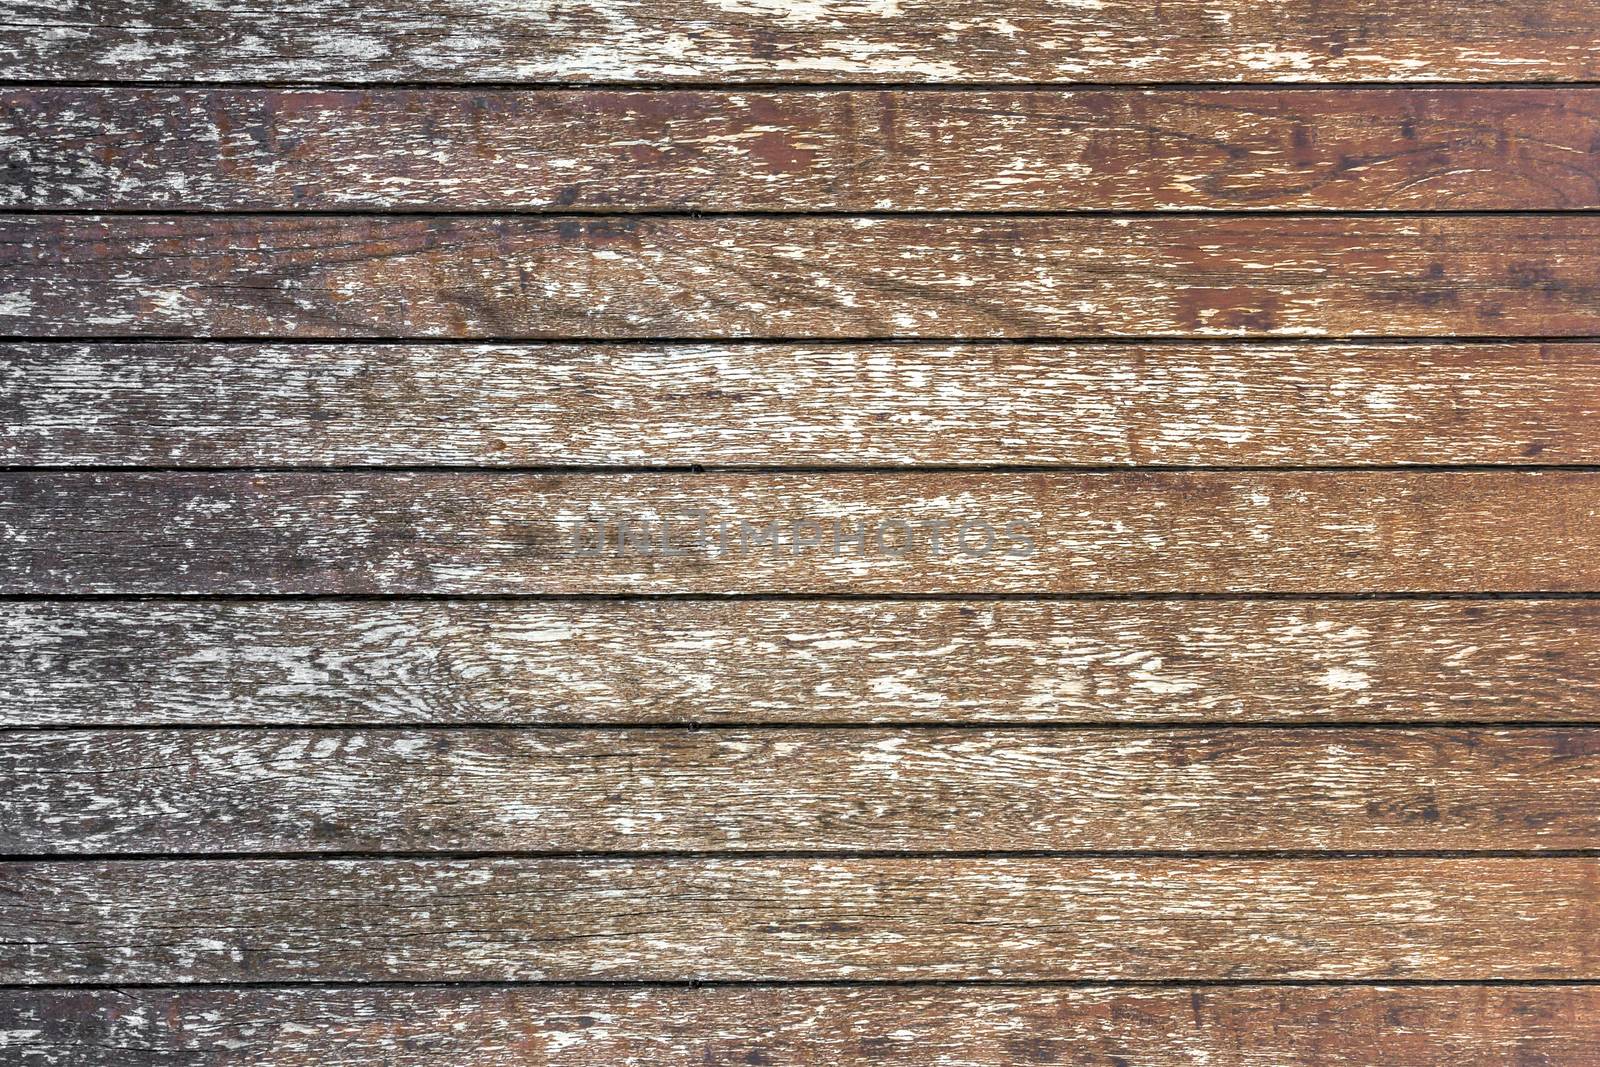 Vintage shabby wooden planks with cracked color paint. Ideal for backgrounds.